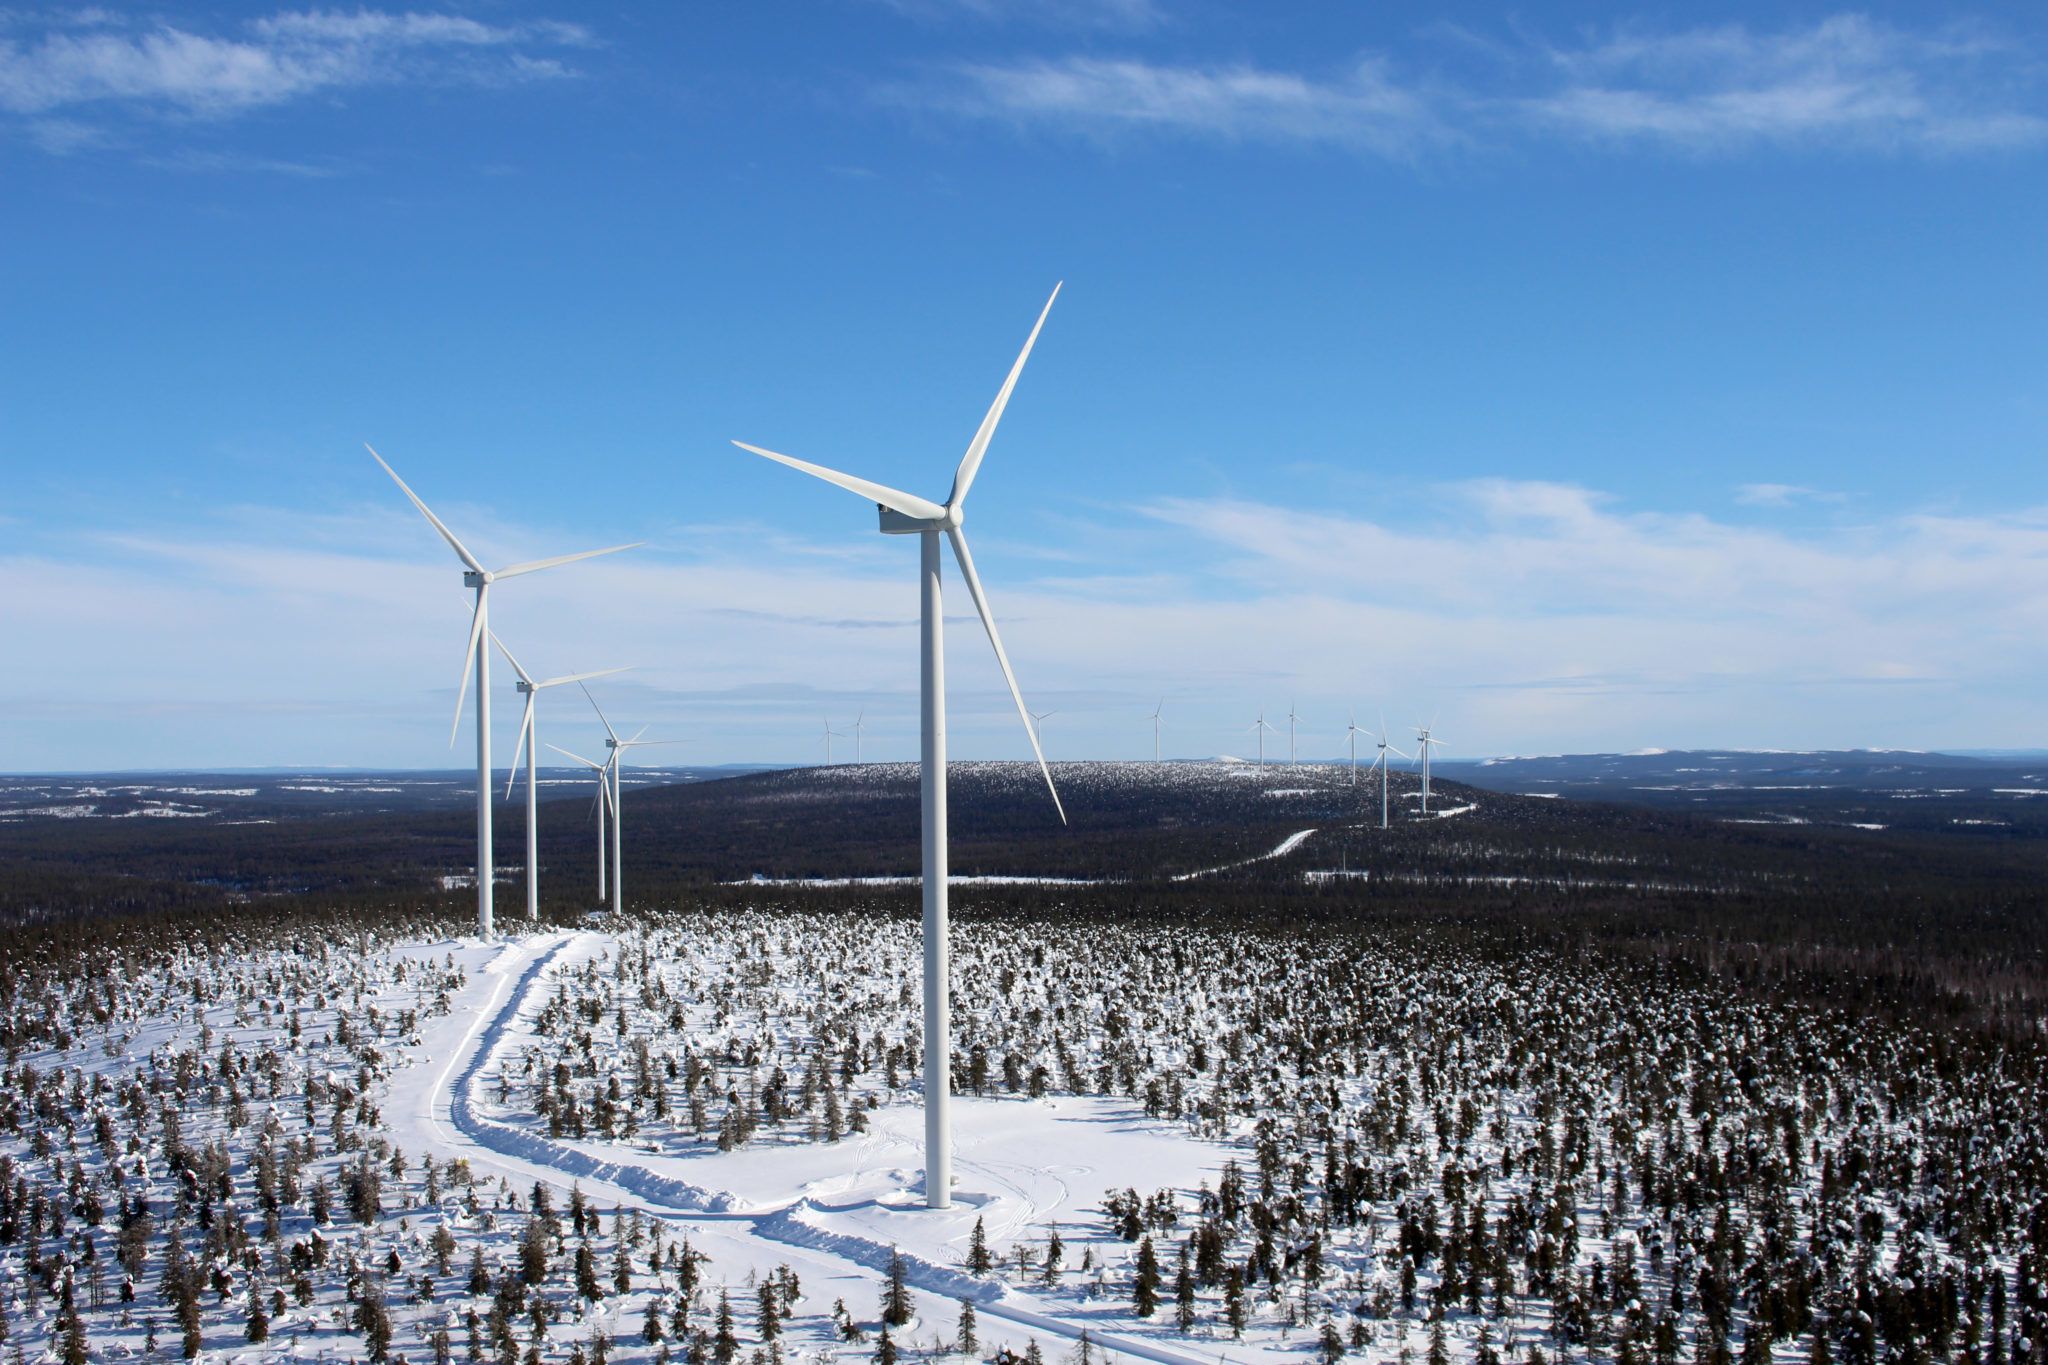 Finland Nearly Doubled Its Wind Power Capacity Last Year - Yale E360